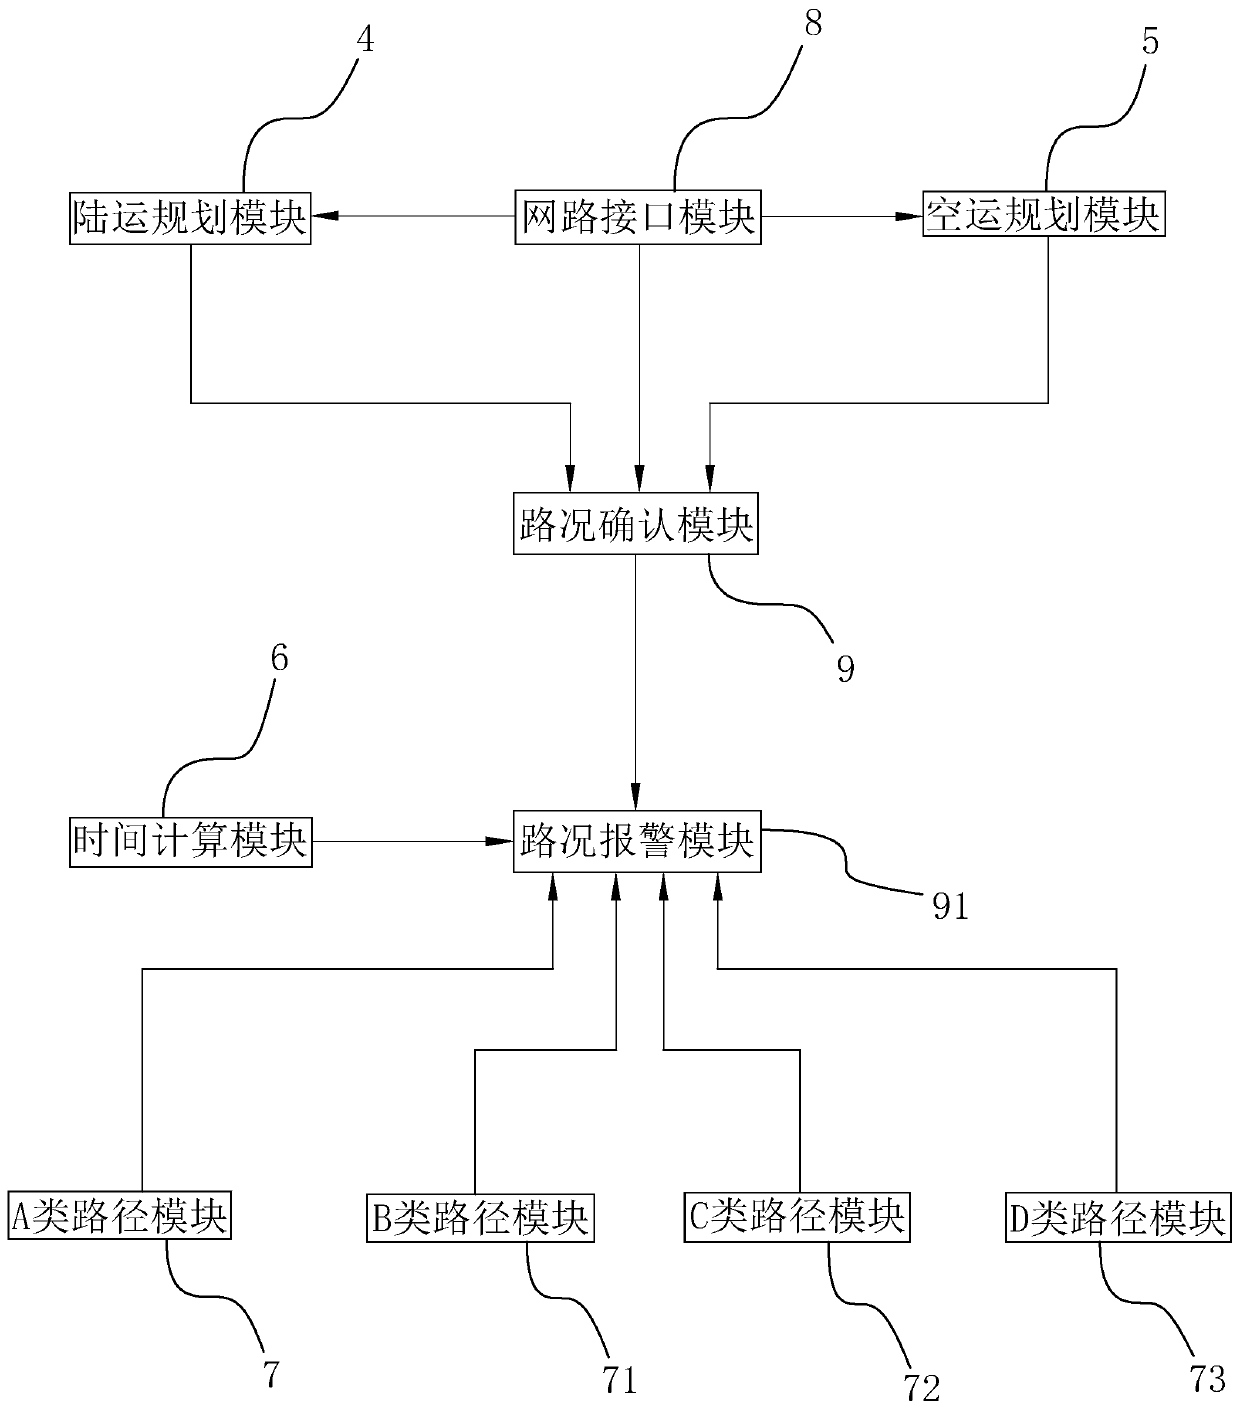 Logistics distribution path planning method and system based on geographic position